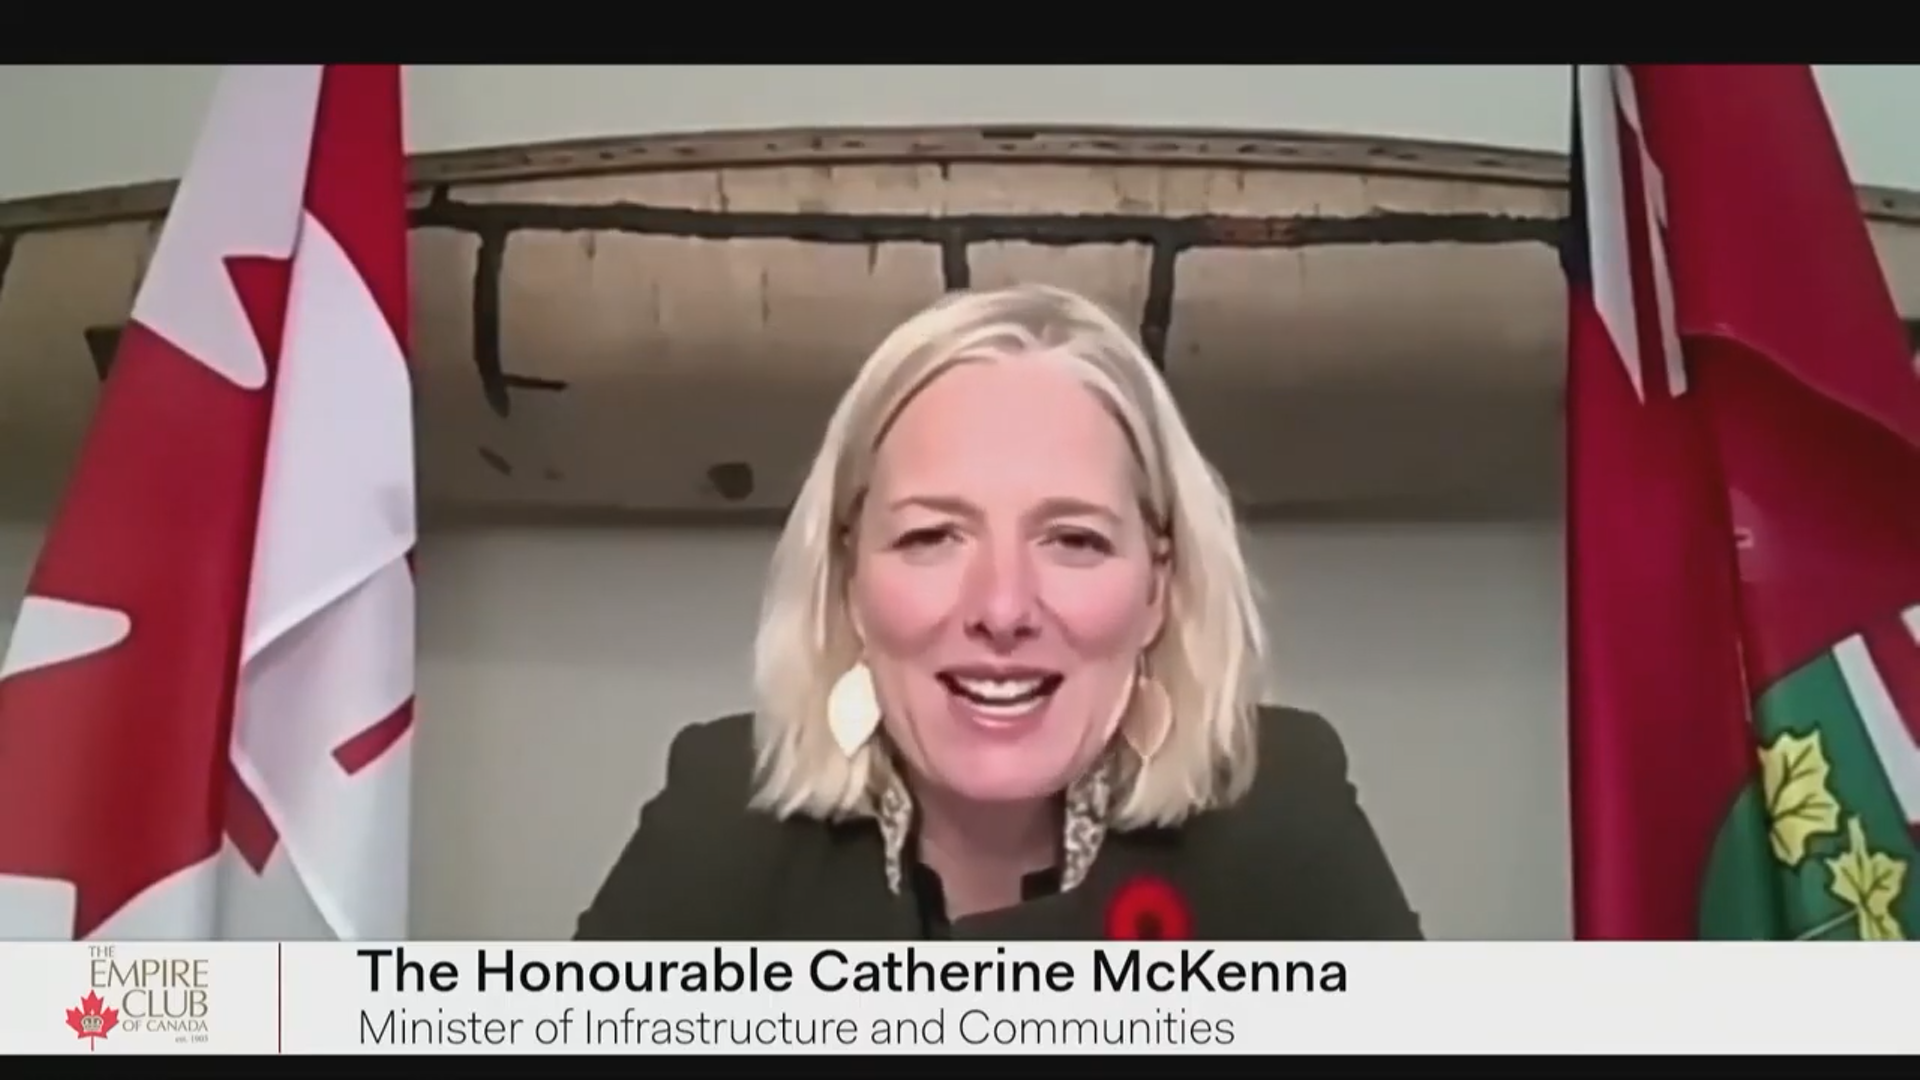 The Honourable Catherine McKenna speaking at a virtual event